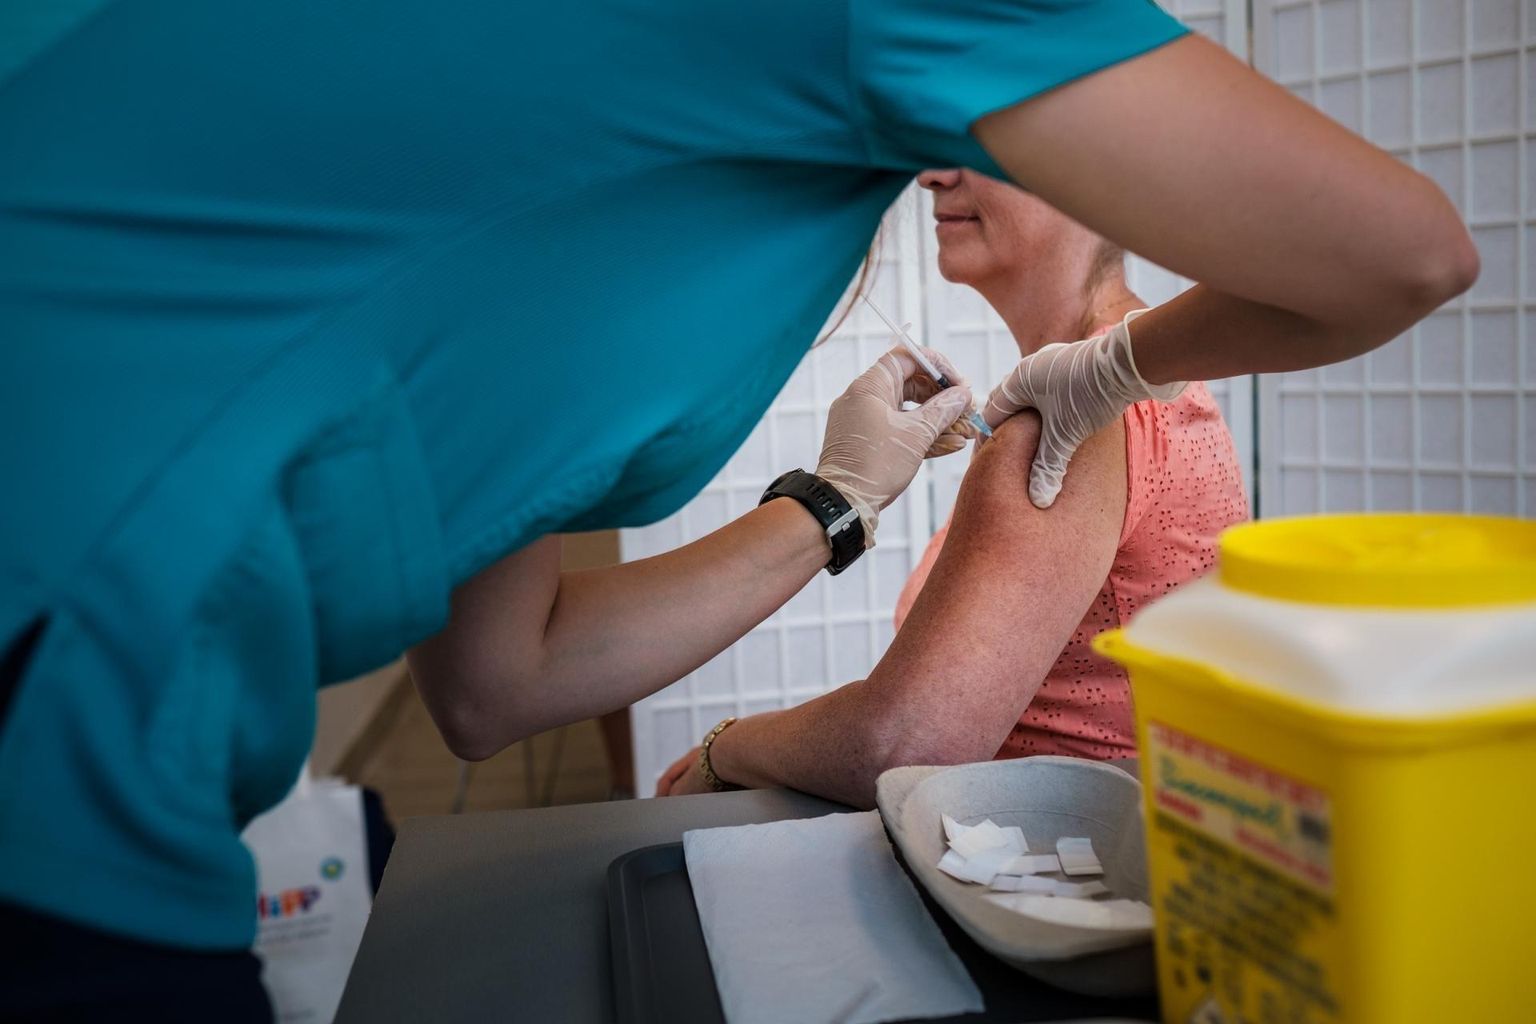 While more countries are opting for the third vaccine shot, the Estonian National Immunoprophylactic Expert Committee finds that there is not enough hard data on the effectiveness and safety of third shots.